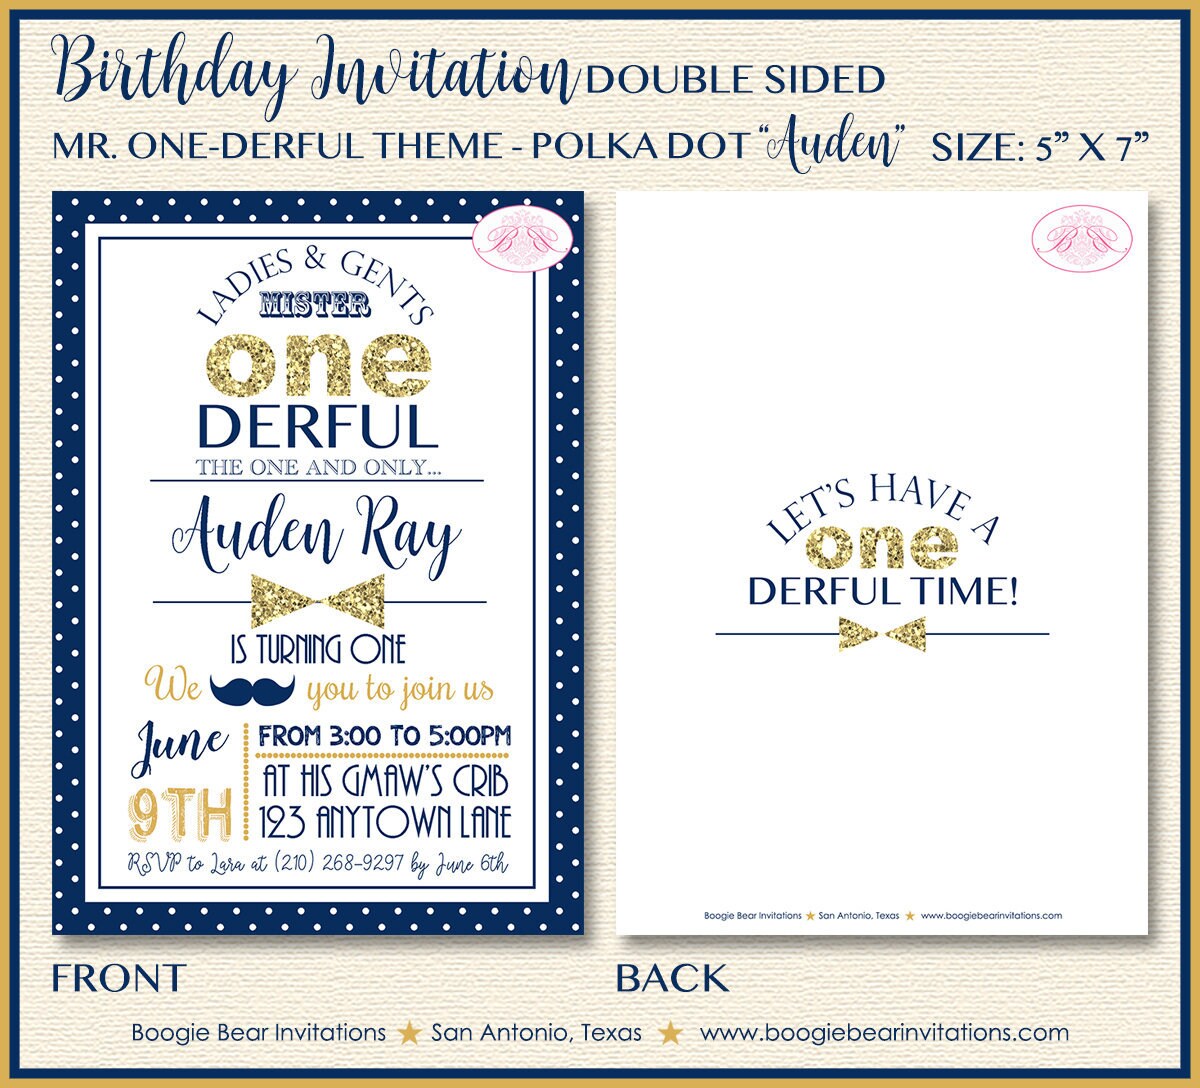 Mr. Wonderful Birthday Party Invitation Bow Tie Little Man Blue Gold ONE 1st Boogie Bear Invitations Auden Theme Paperless Printable Printed